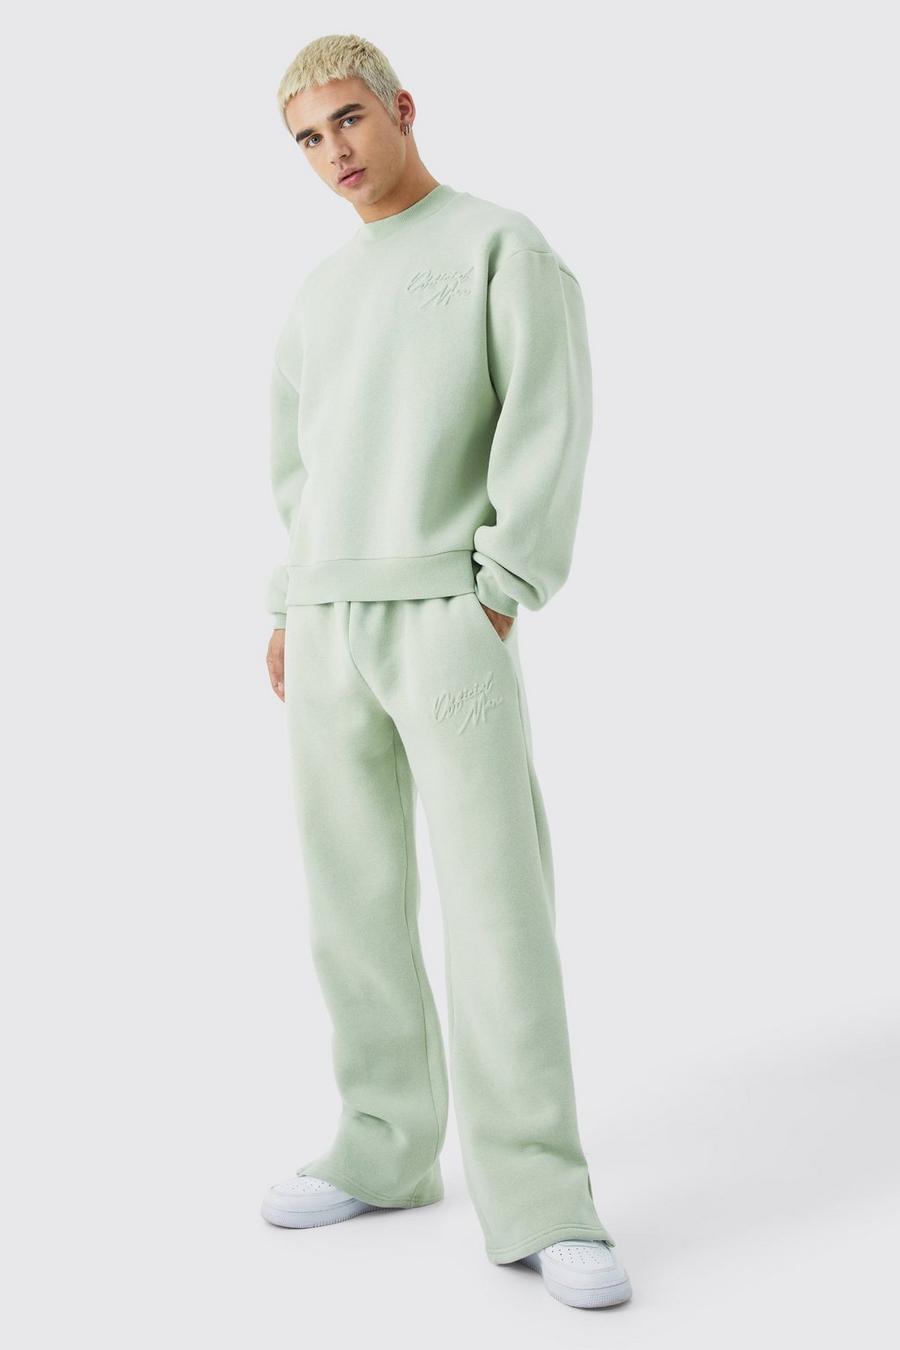 Sage Official Oversized Boxy Trainingspak Met Reliëf